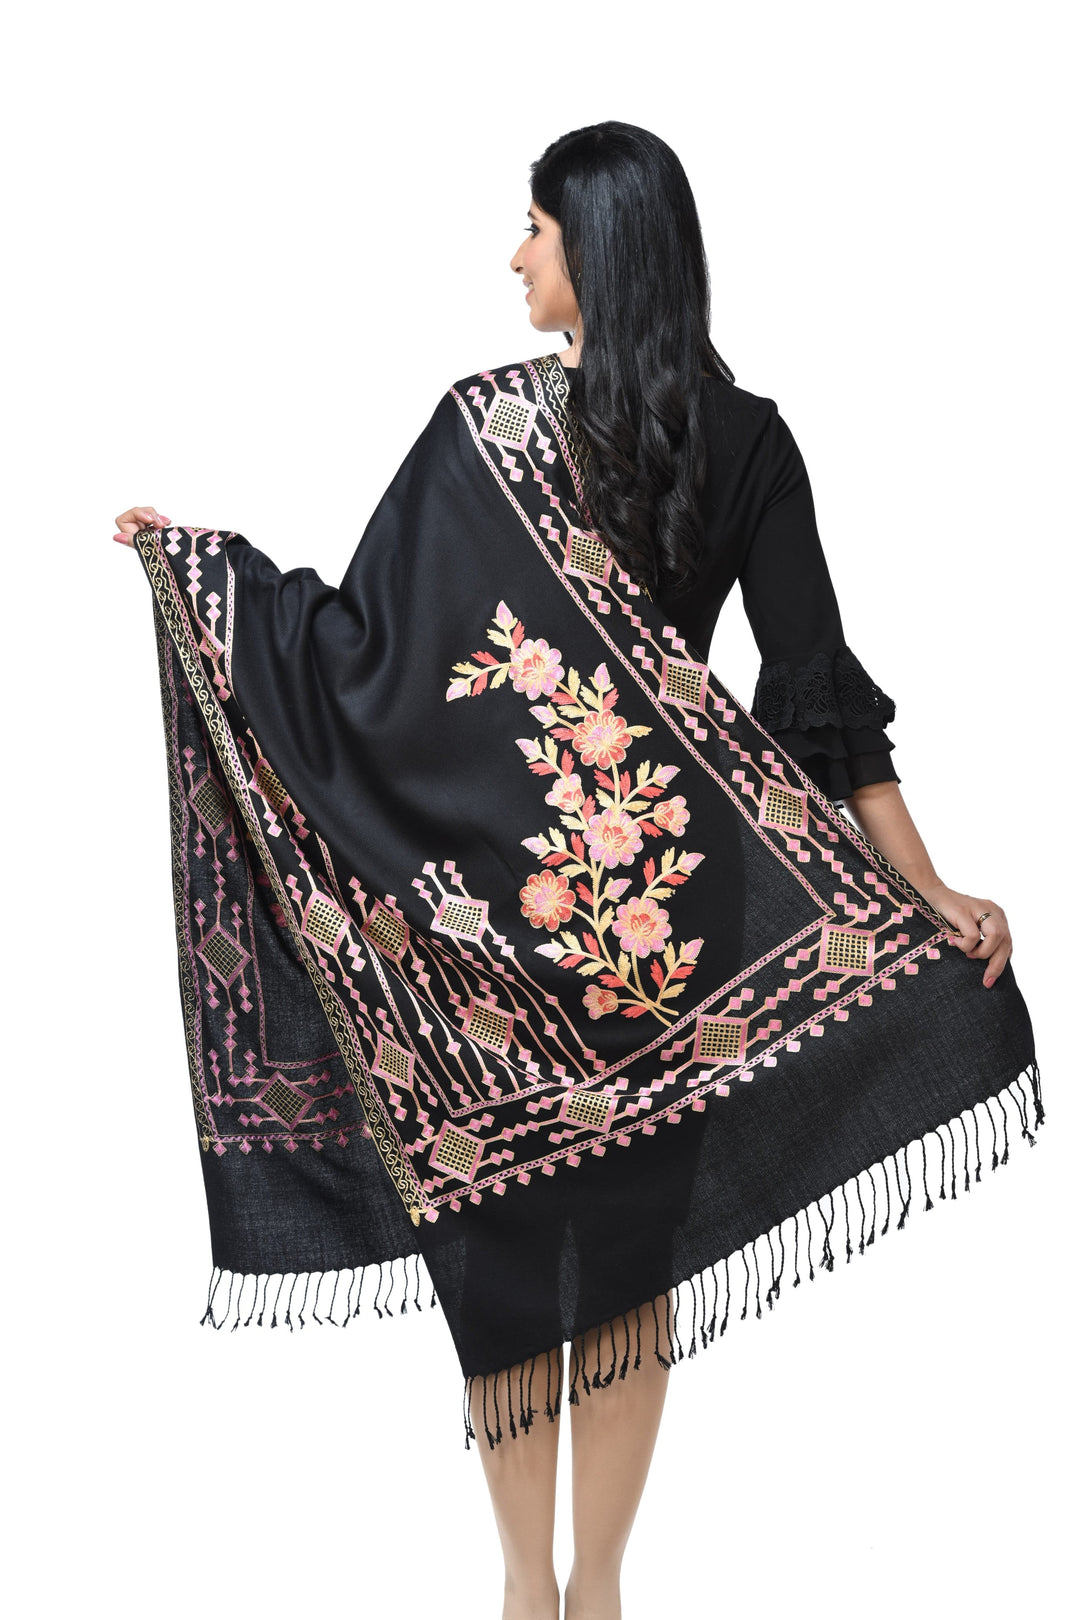 Pashwool Womens Stoles and Scarves Scarf Pashwool Womens Stole, Kashmiri Embroidery, Soft And Warm, Woollen Stole, Black